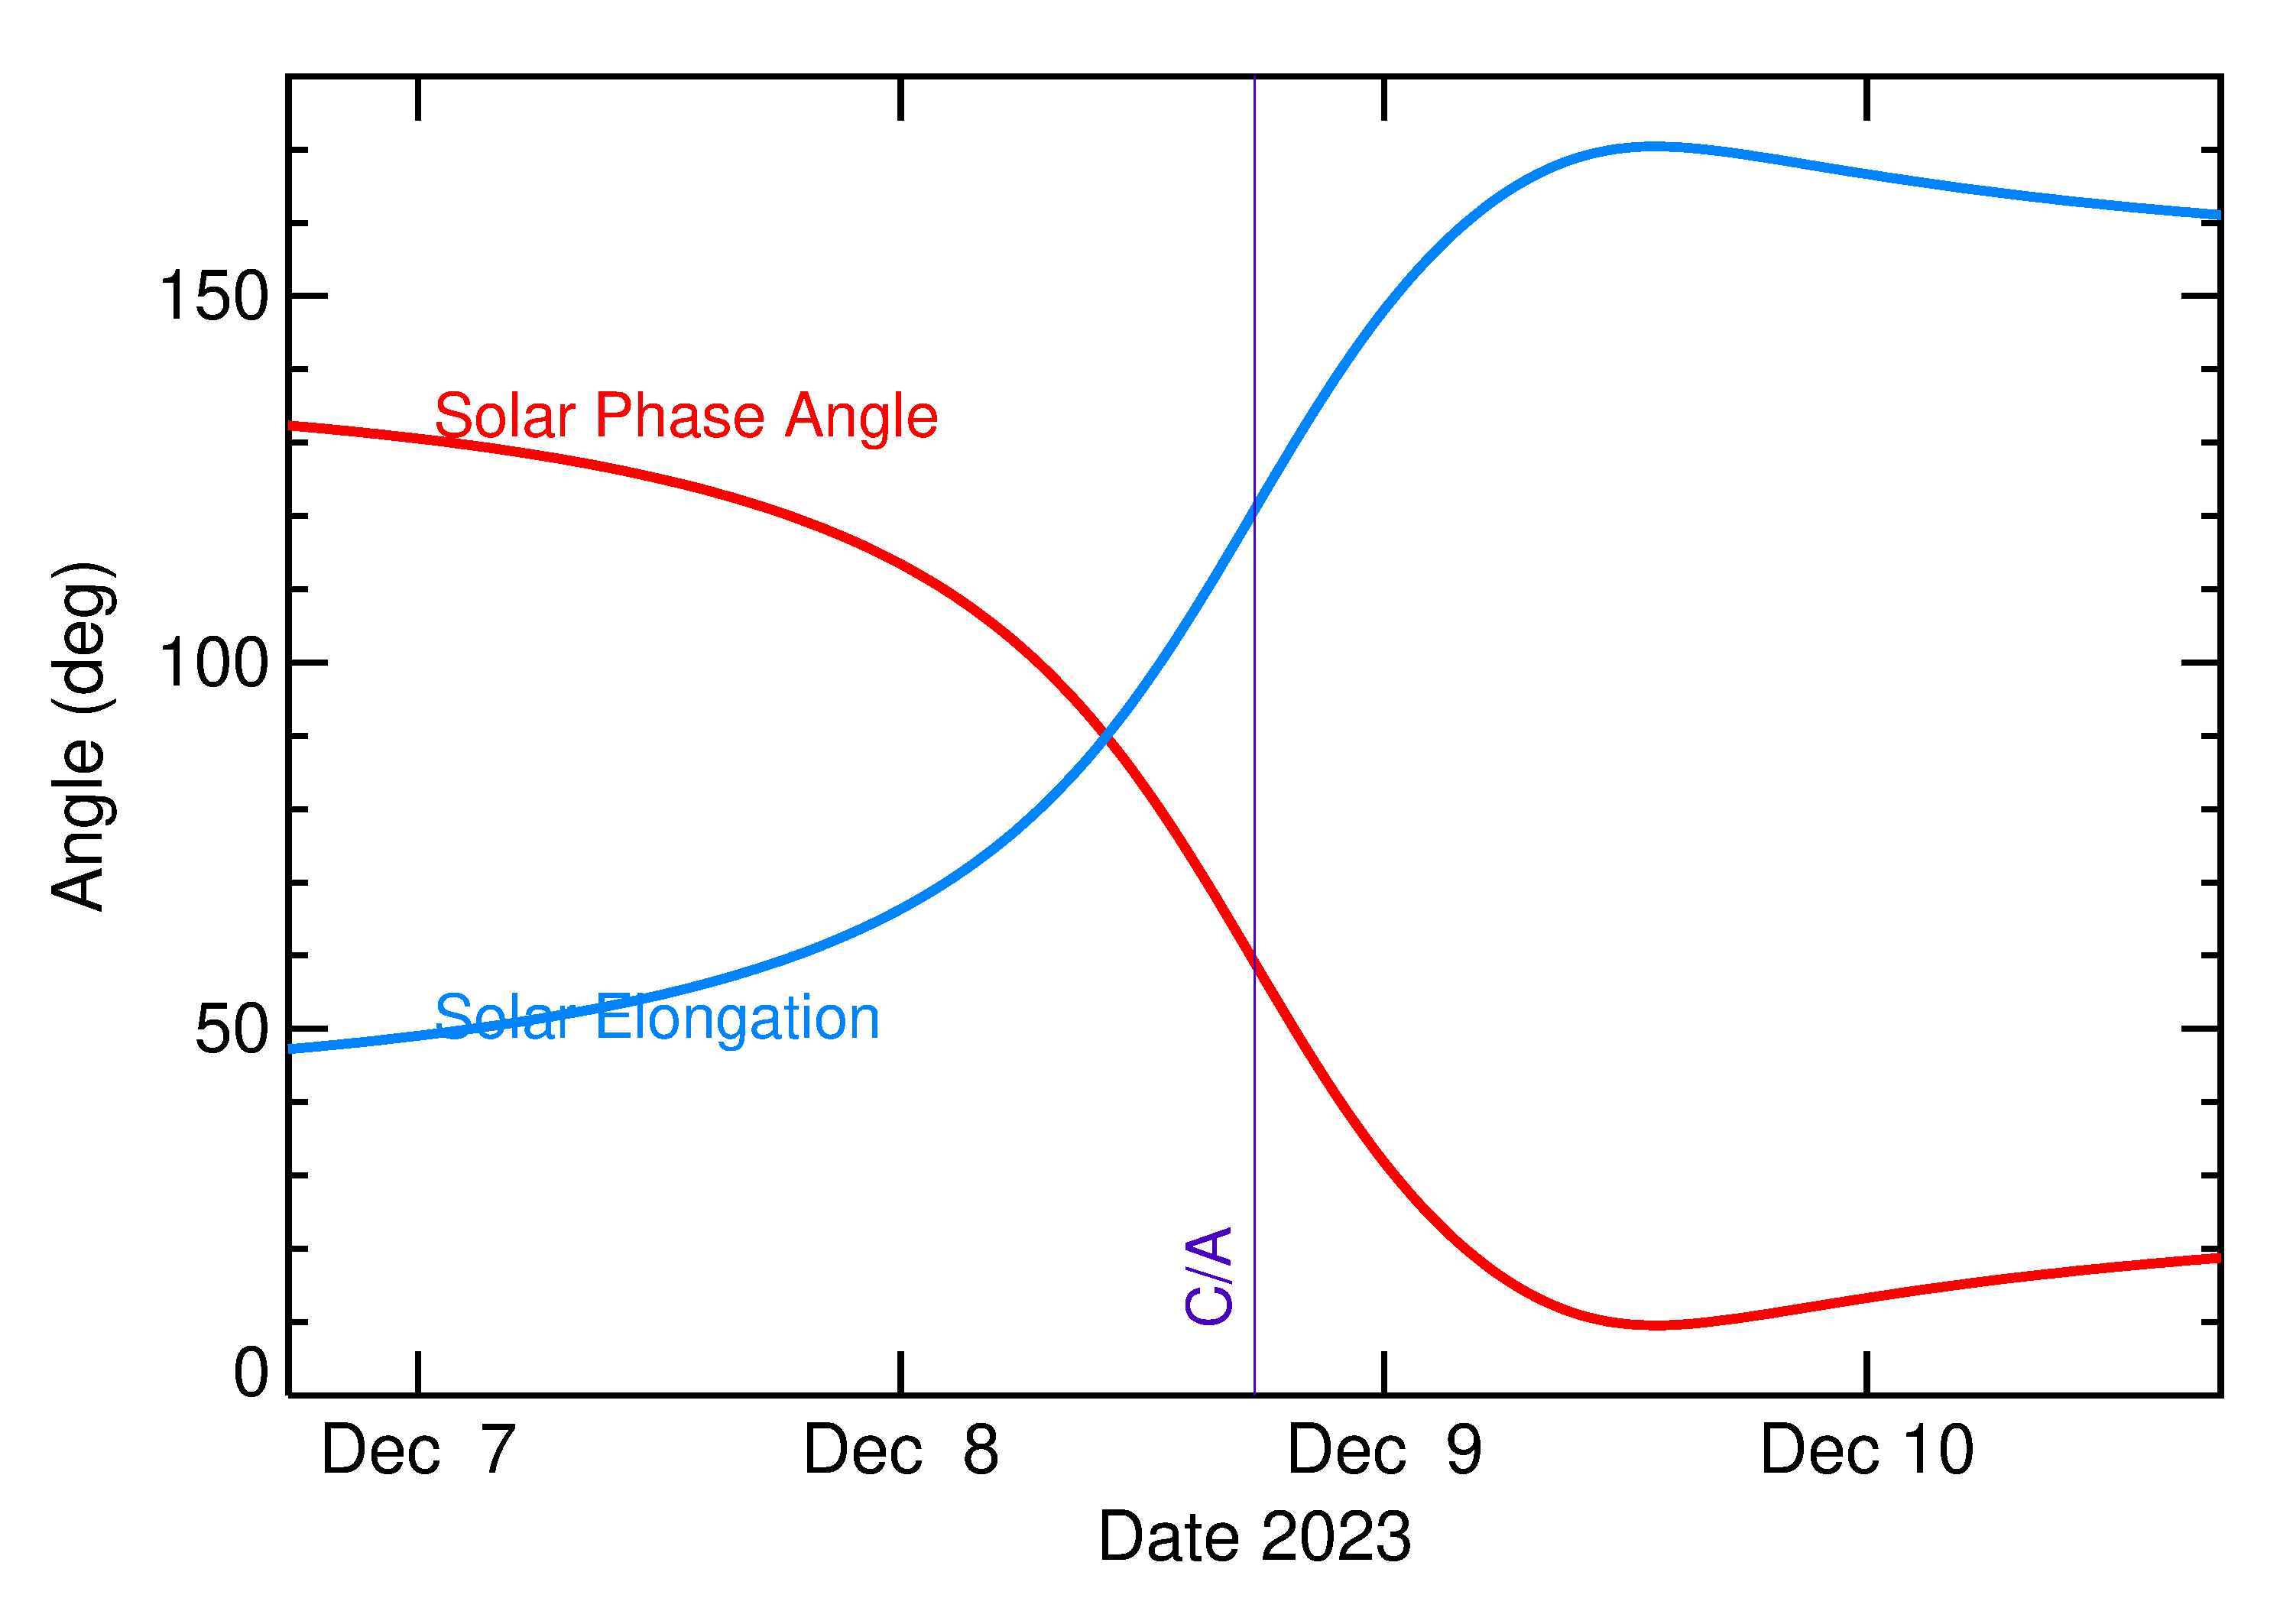 Solar Elongation and Solar Phase Angle of 2023 XU5 in the days around closest approach